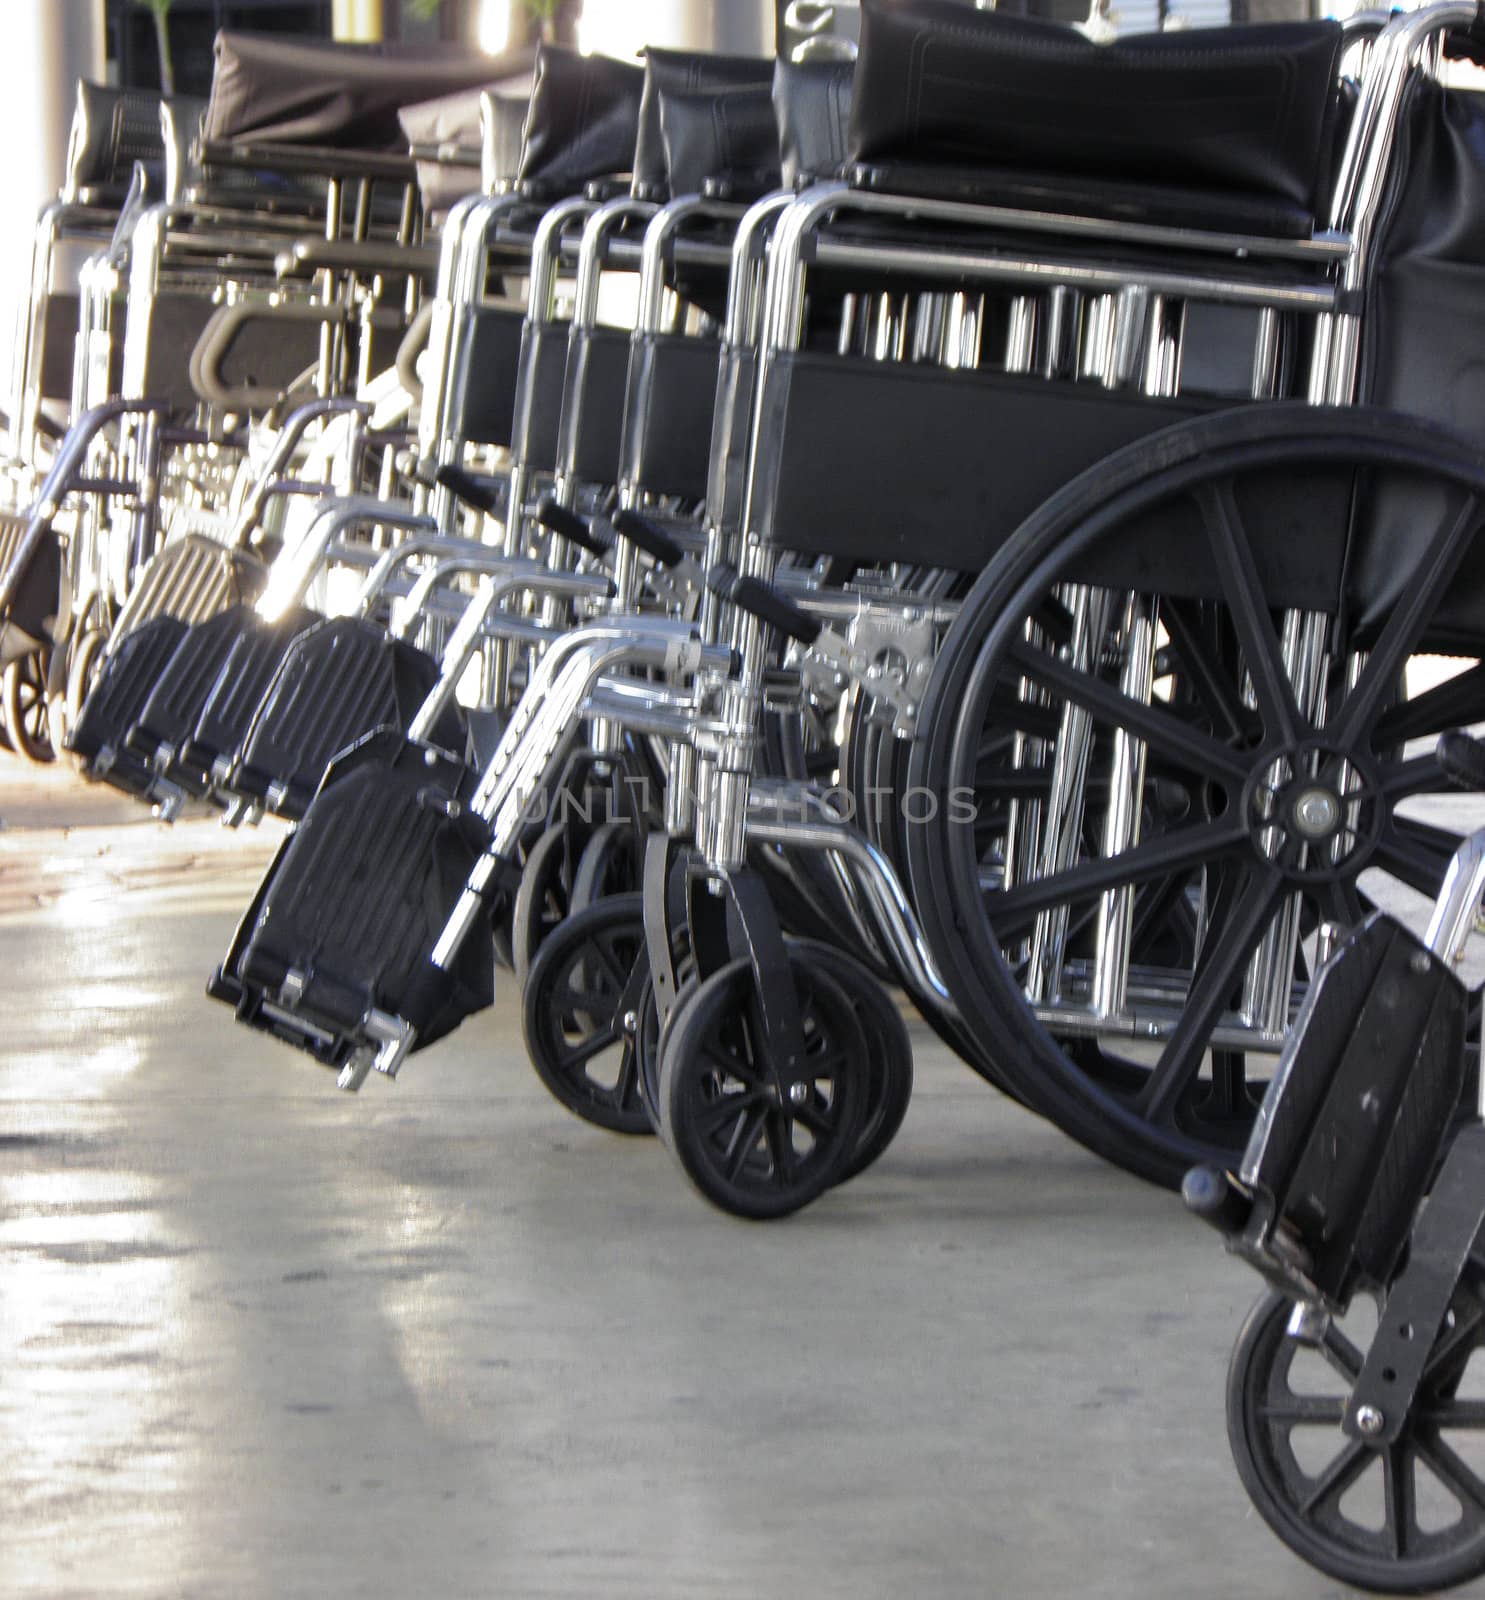 Sunrise in the hospital with wheelchairs waiting for patients